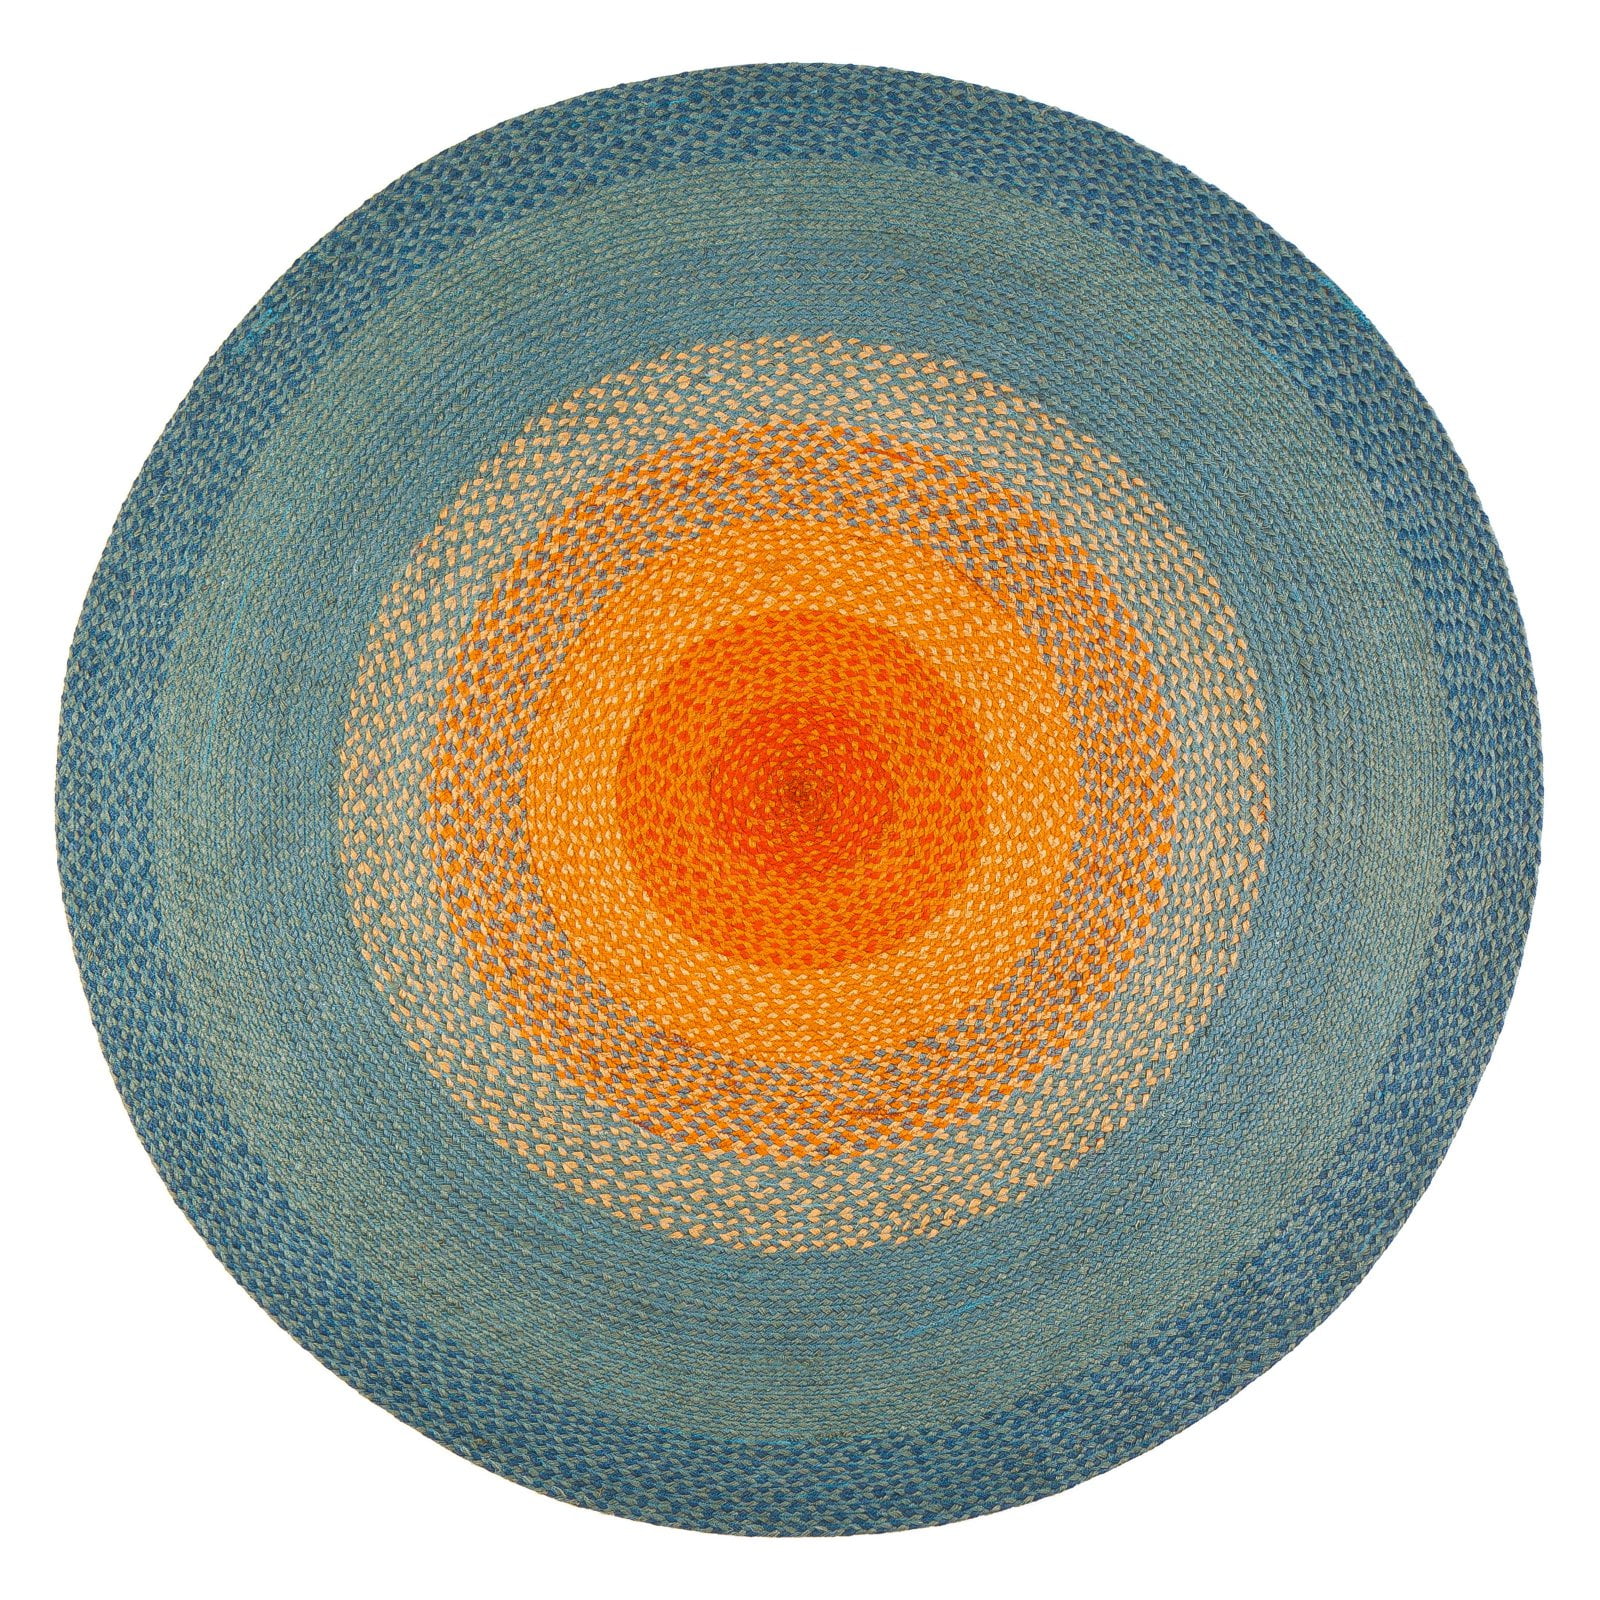 Picture of Anji Mountain AMB0424-080R 8 ft. Olwyn Braided Round Area Rug - Blue, Orange & Red